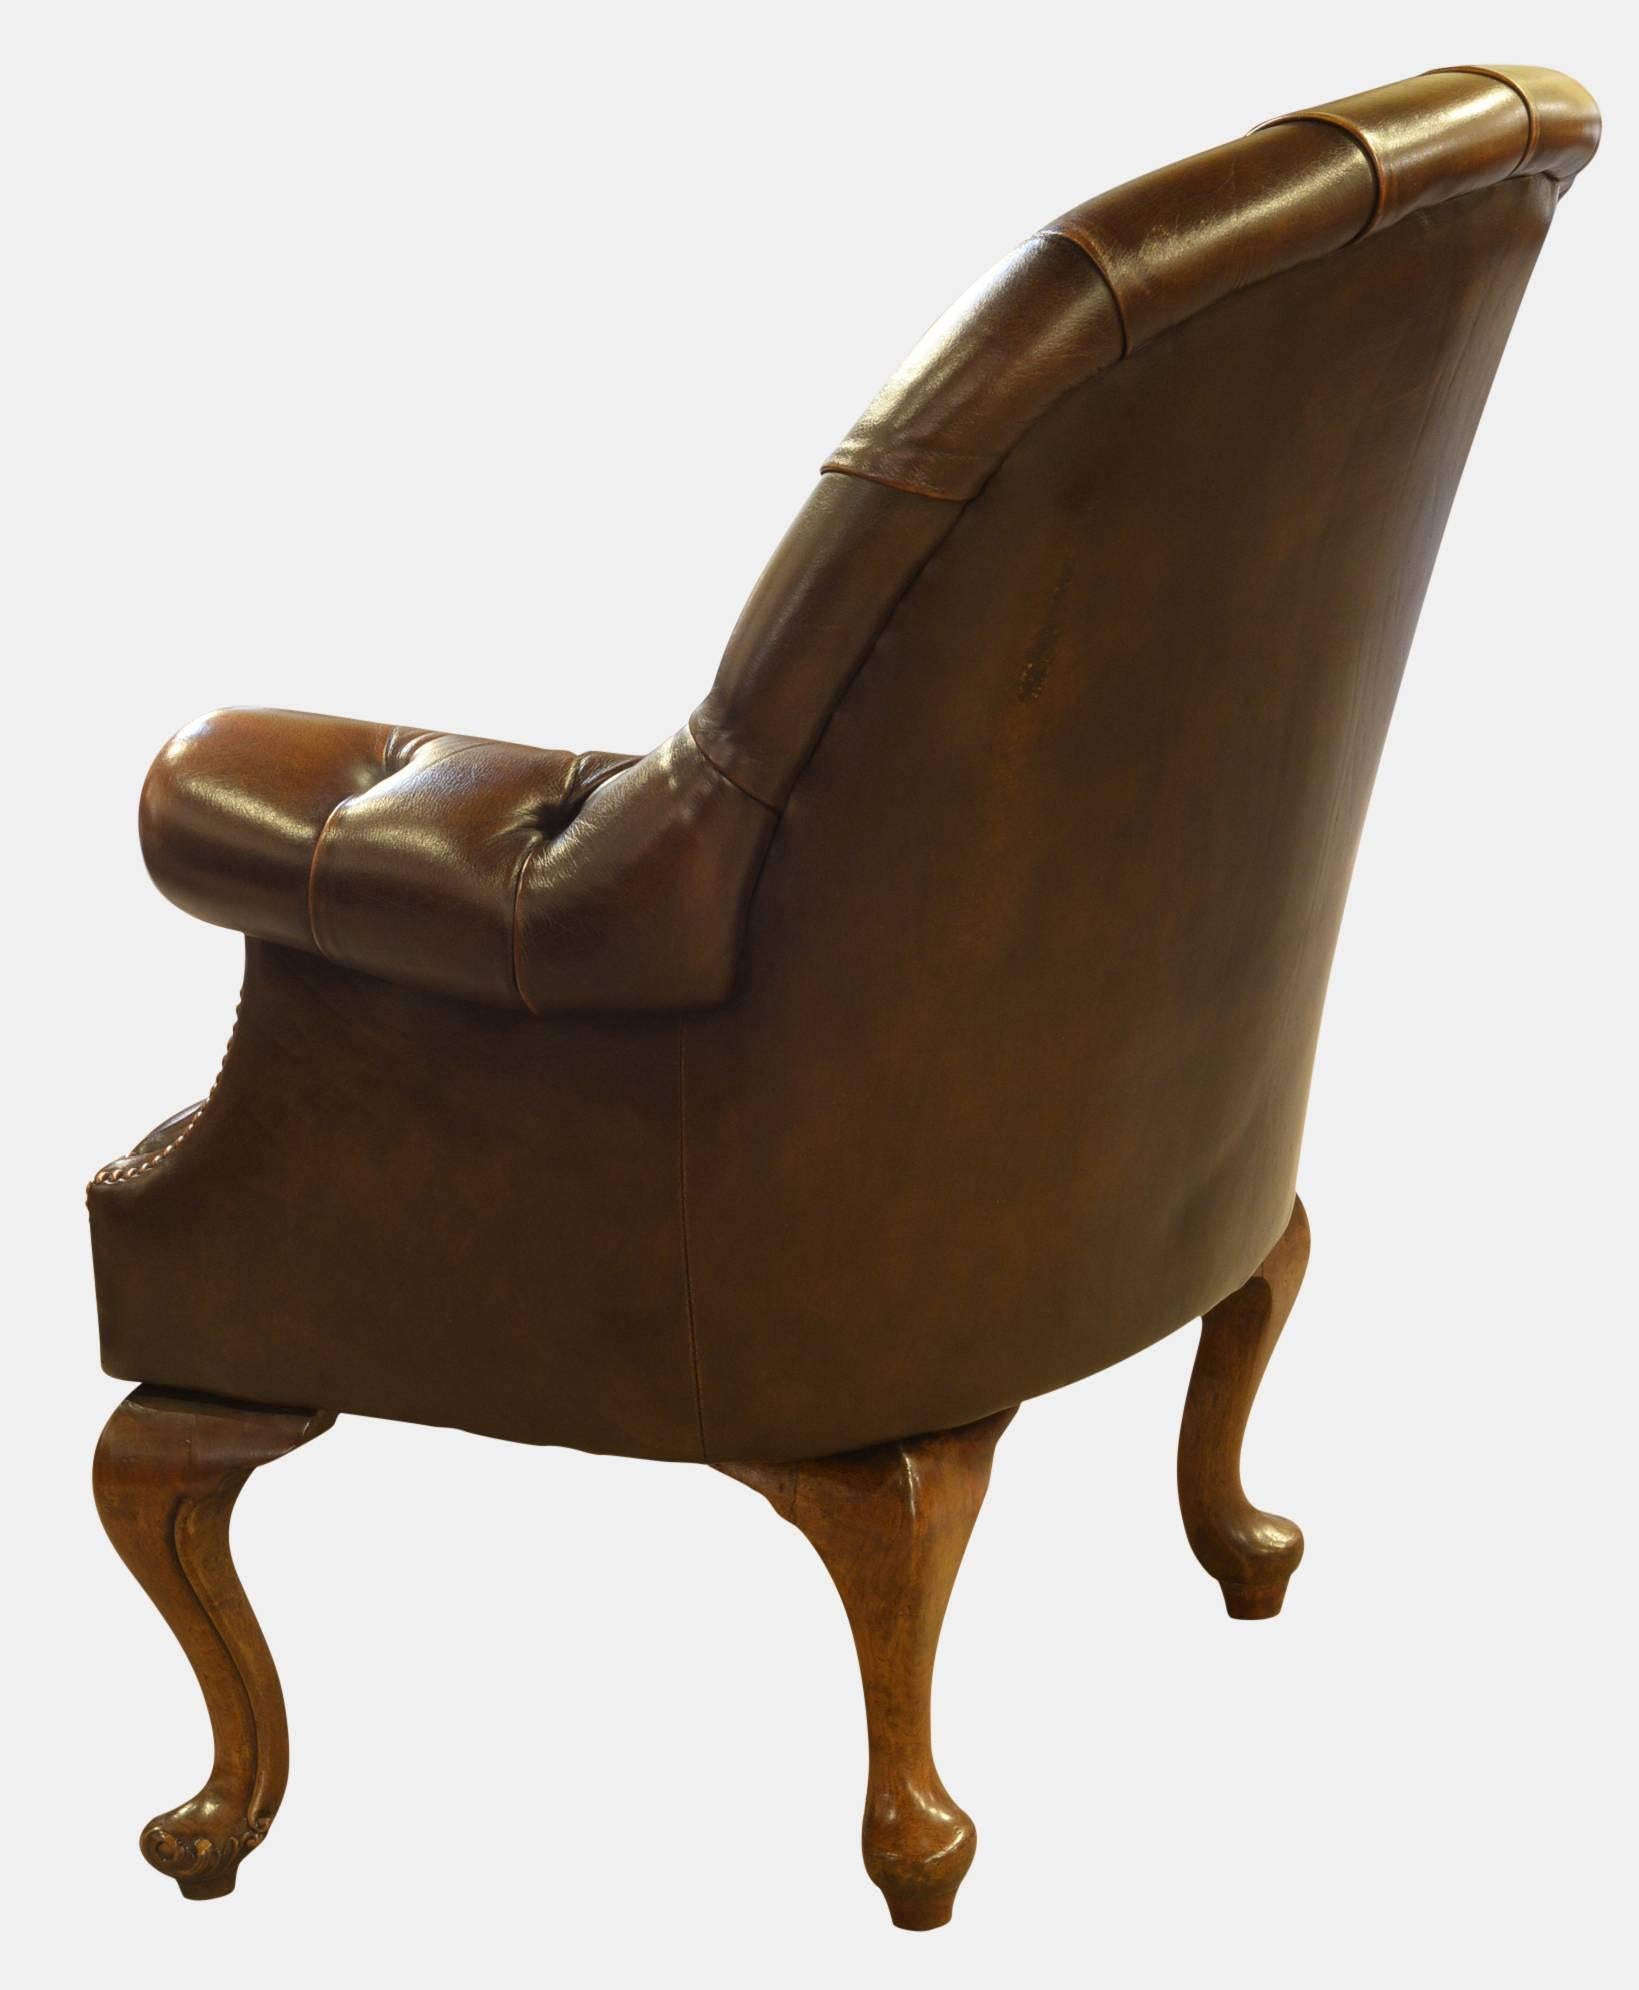 20th Century Queen Anne Style Library Chair